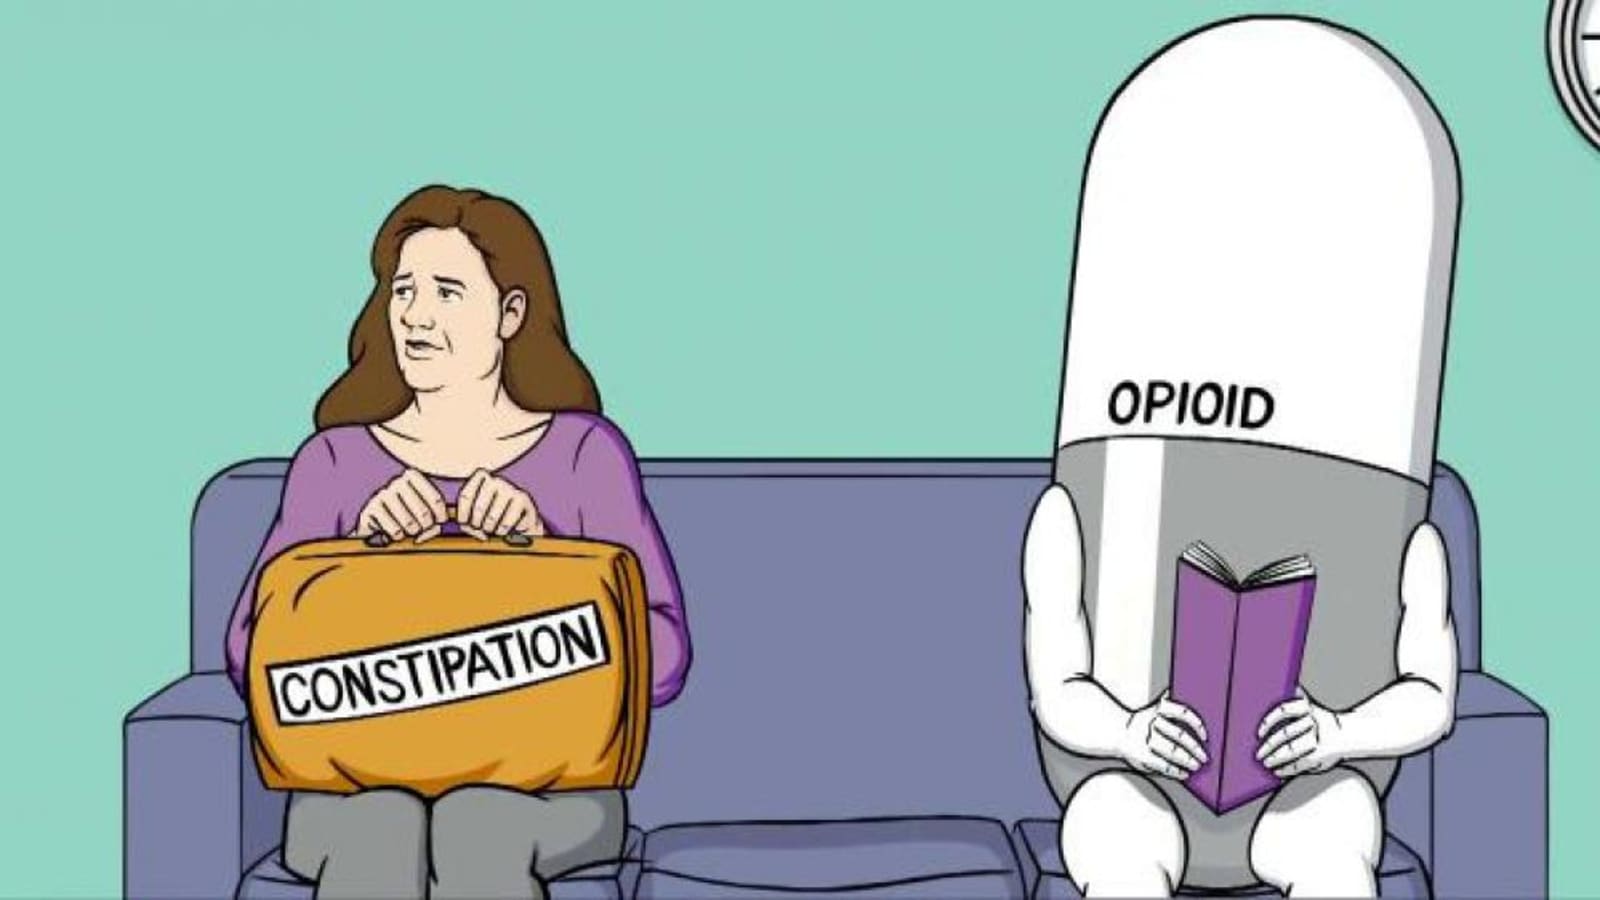 No joke: Opioid constipation drugs are serious business